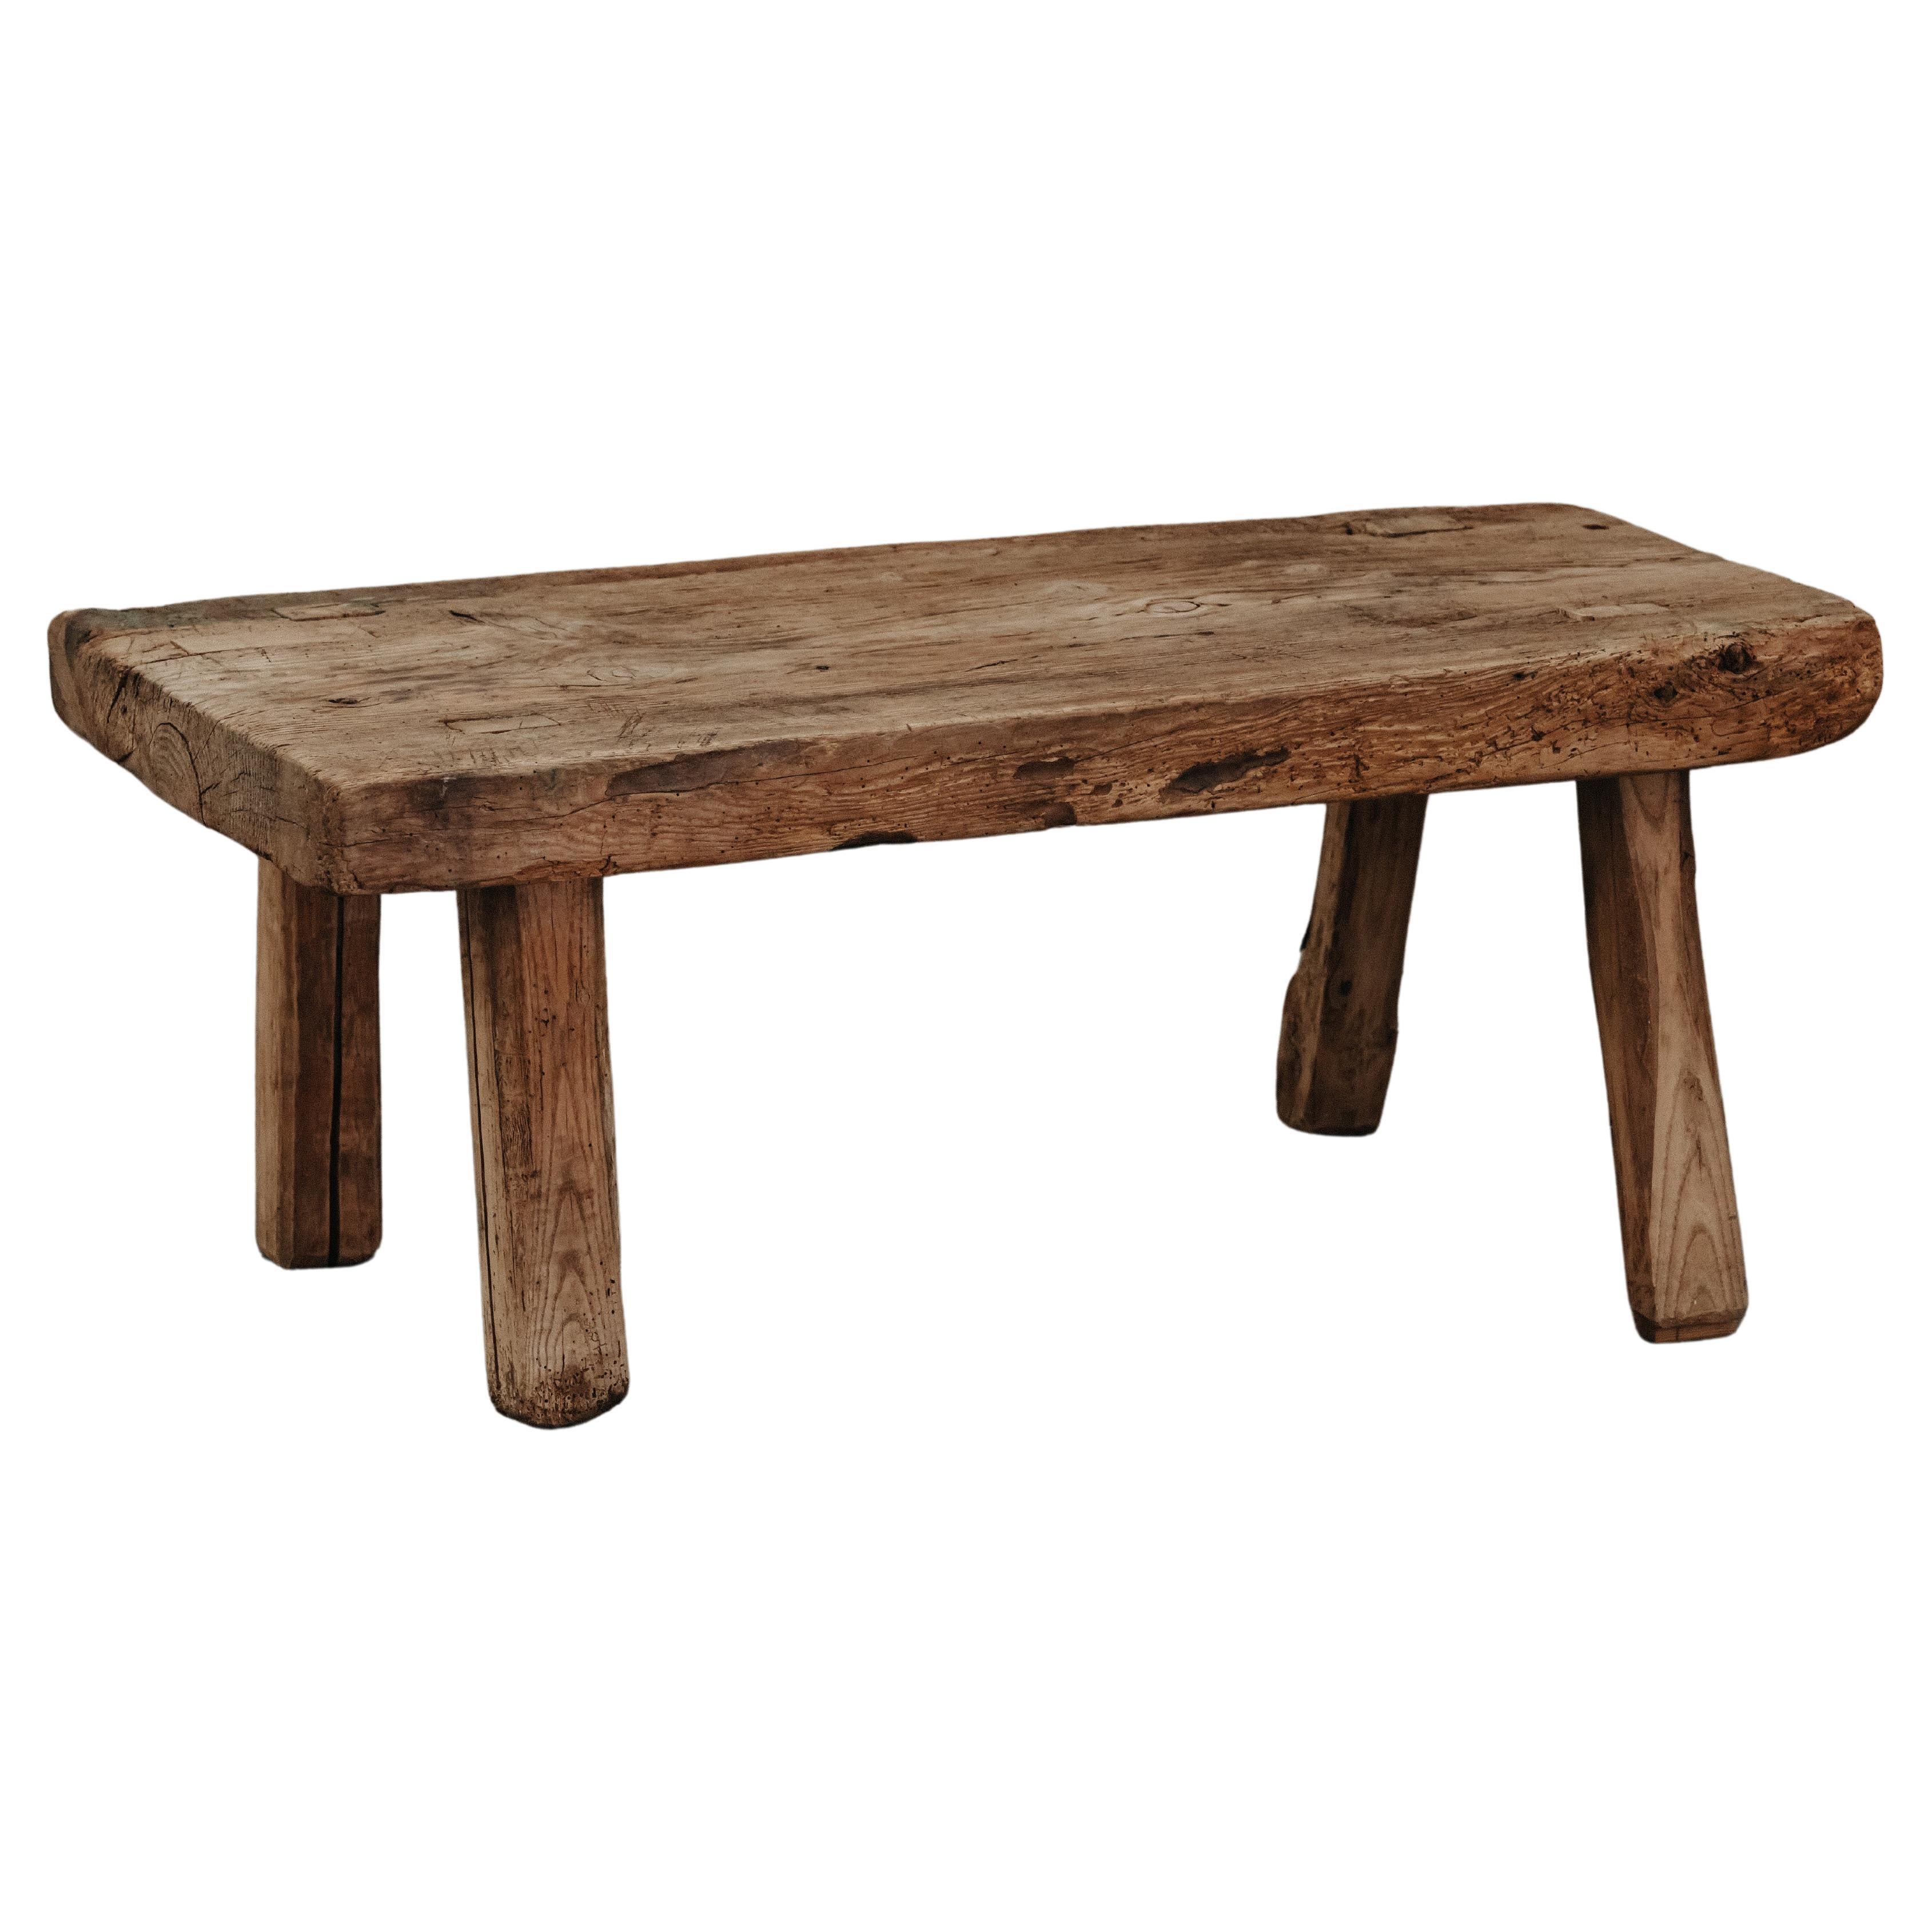 Primitive Pine Coffee Table From France, Circa 1850